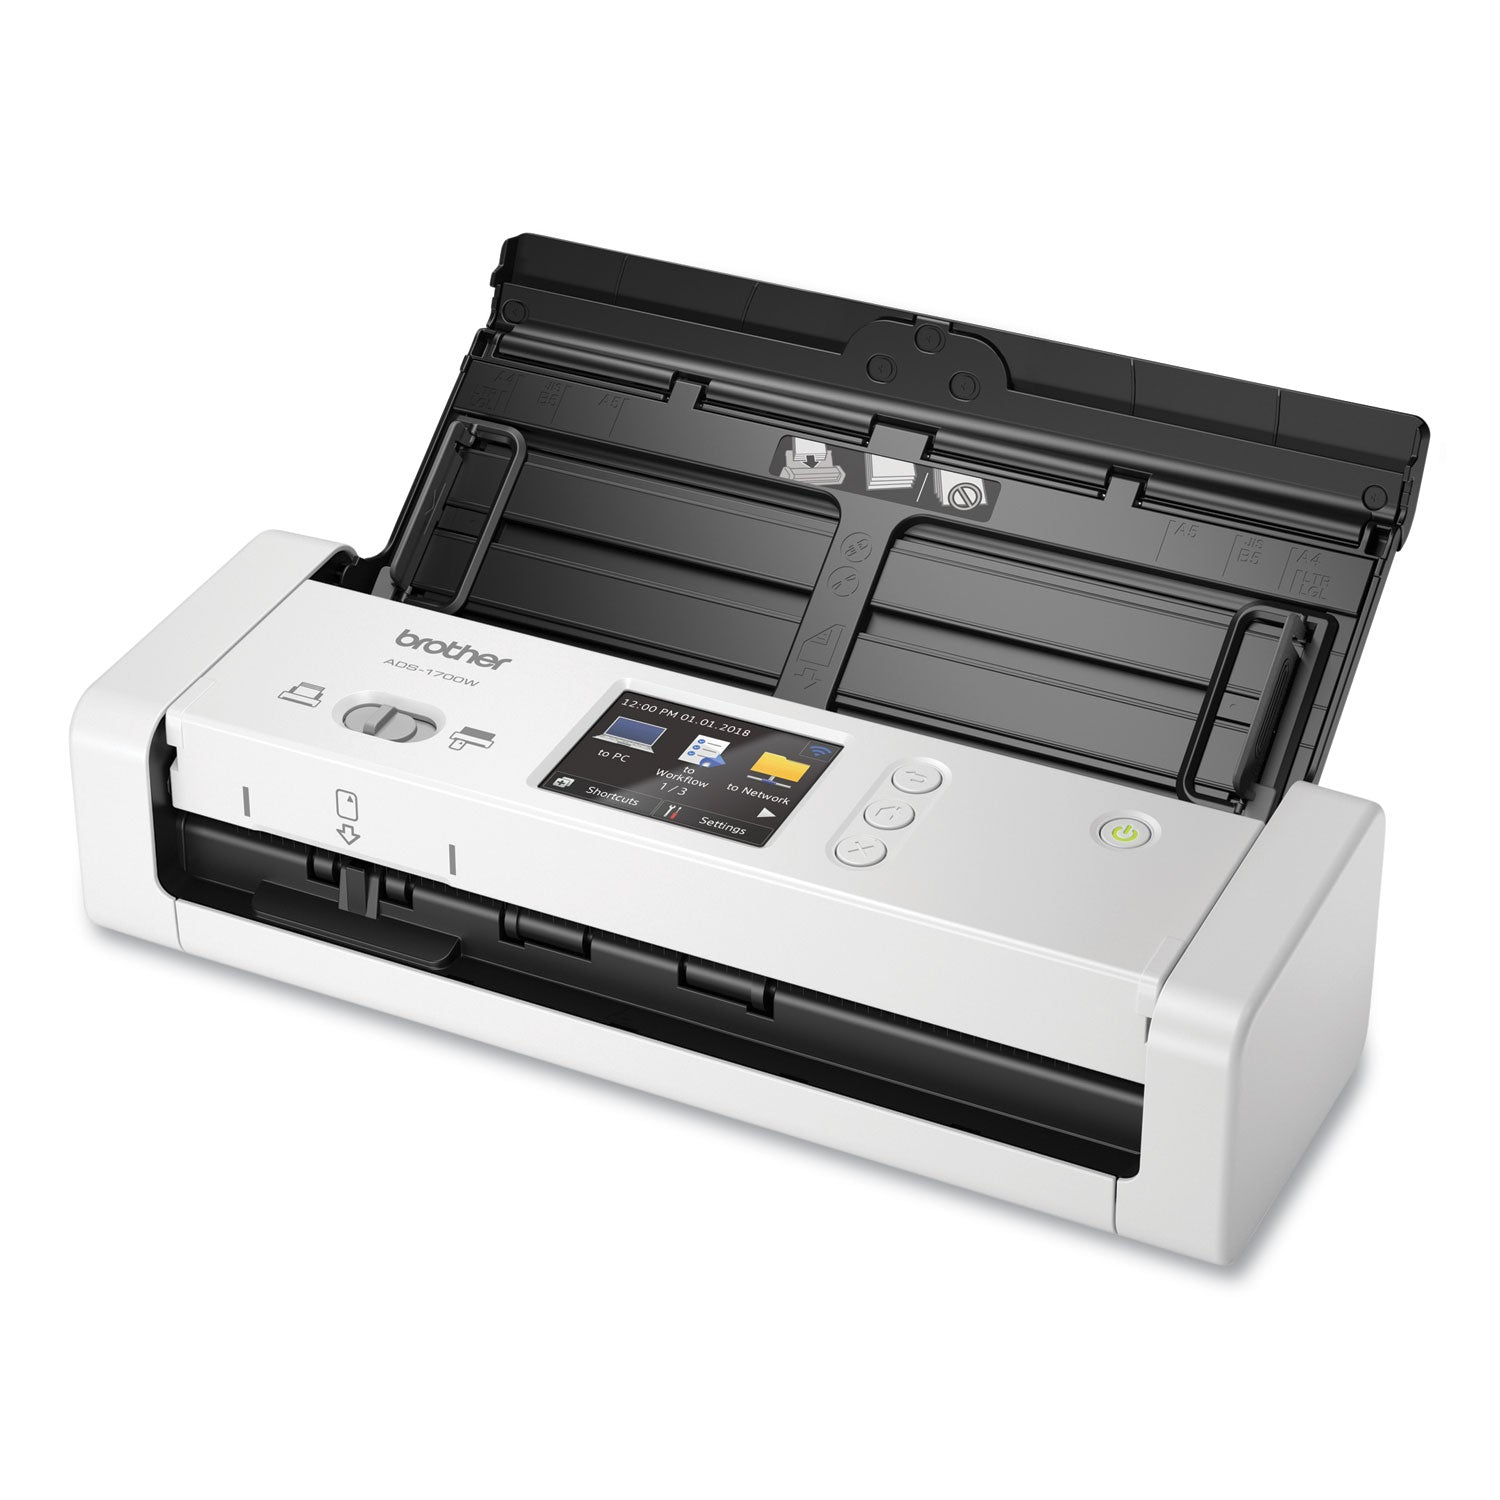 ads1700w-wireless-compact-color-desktop-scanner-with-duplex-and-touchscreen_brtads1700w - 2